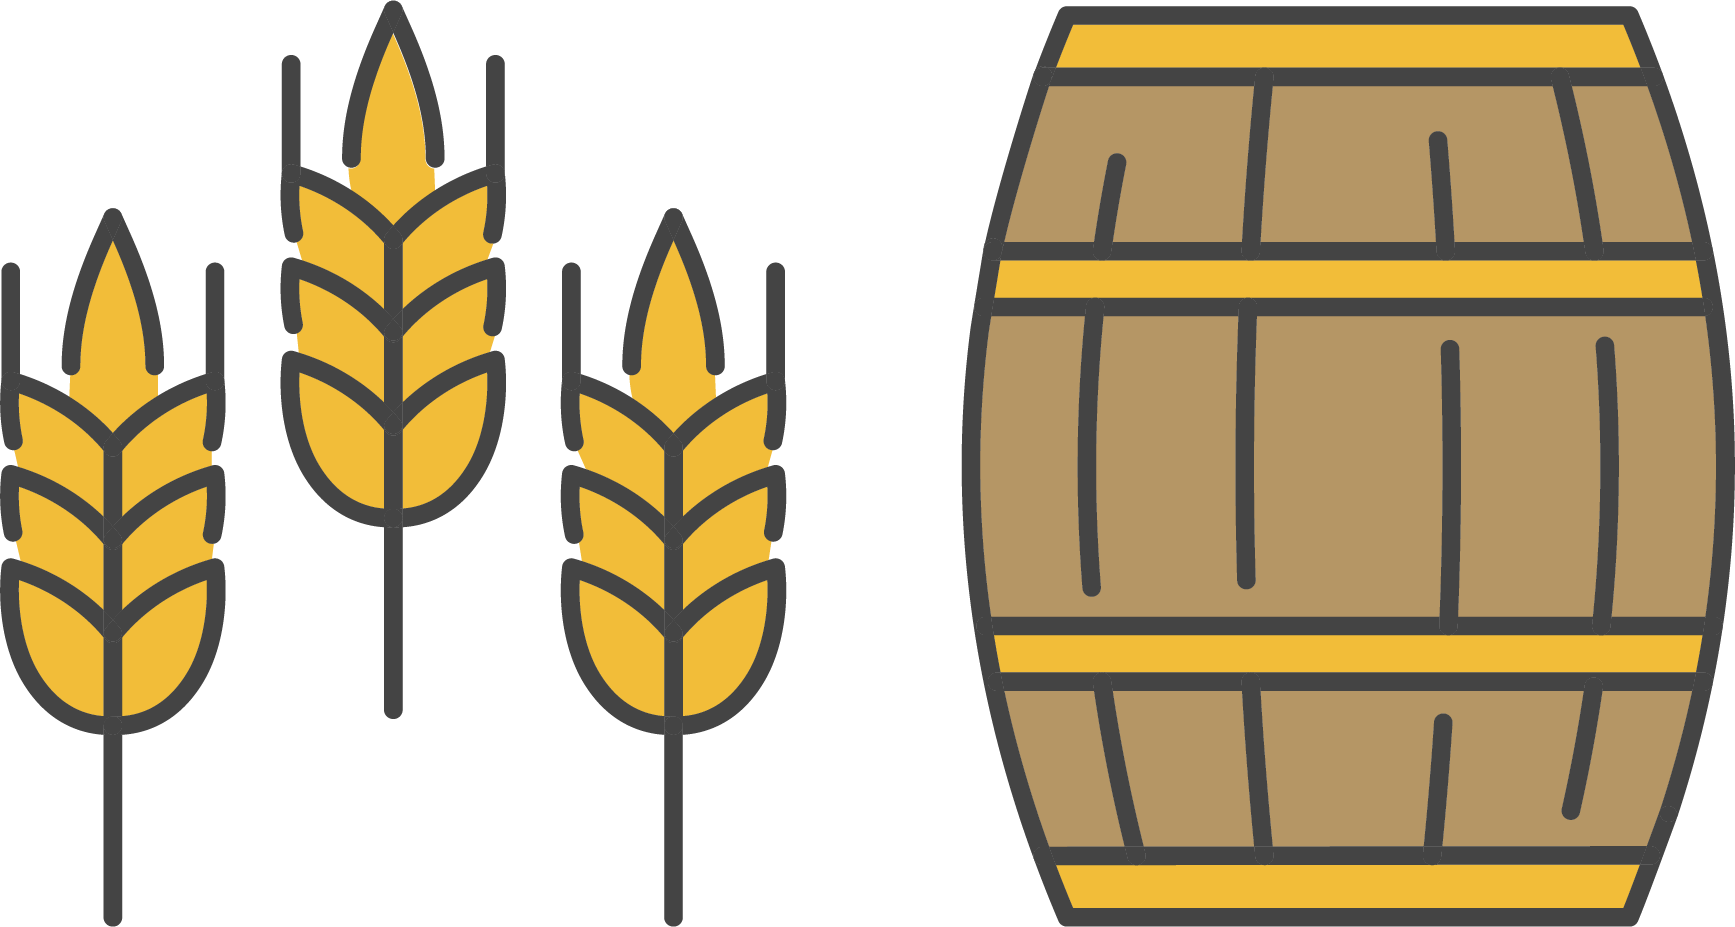 Wheat and barrel icons